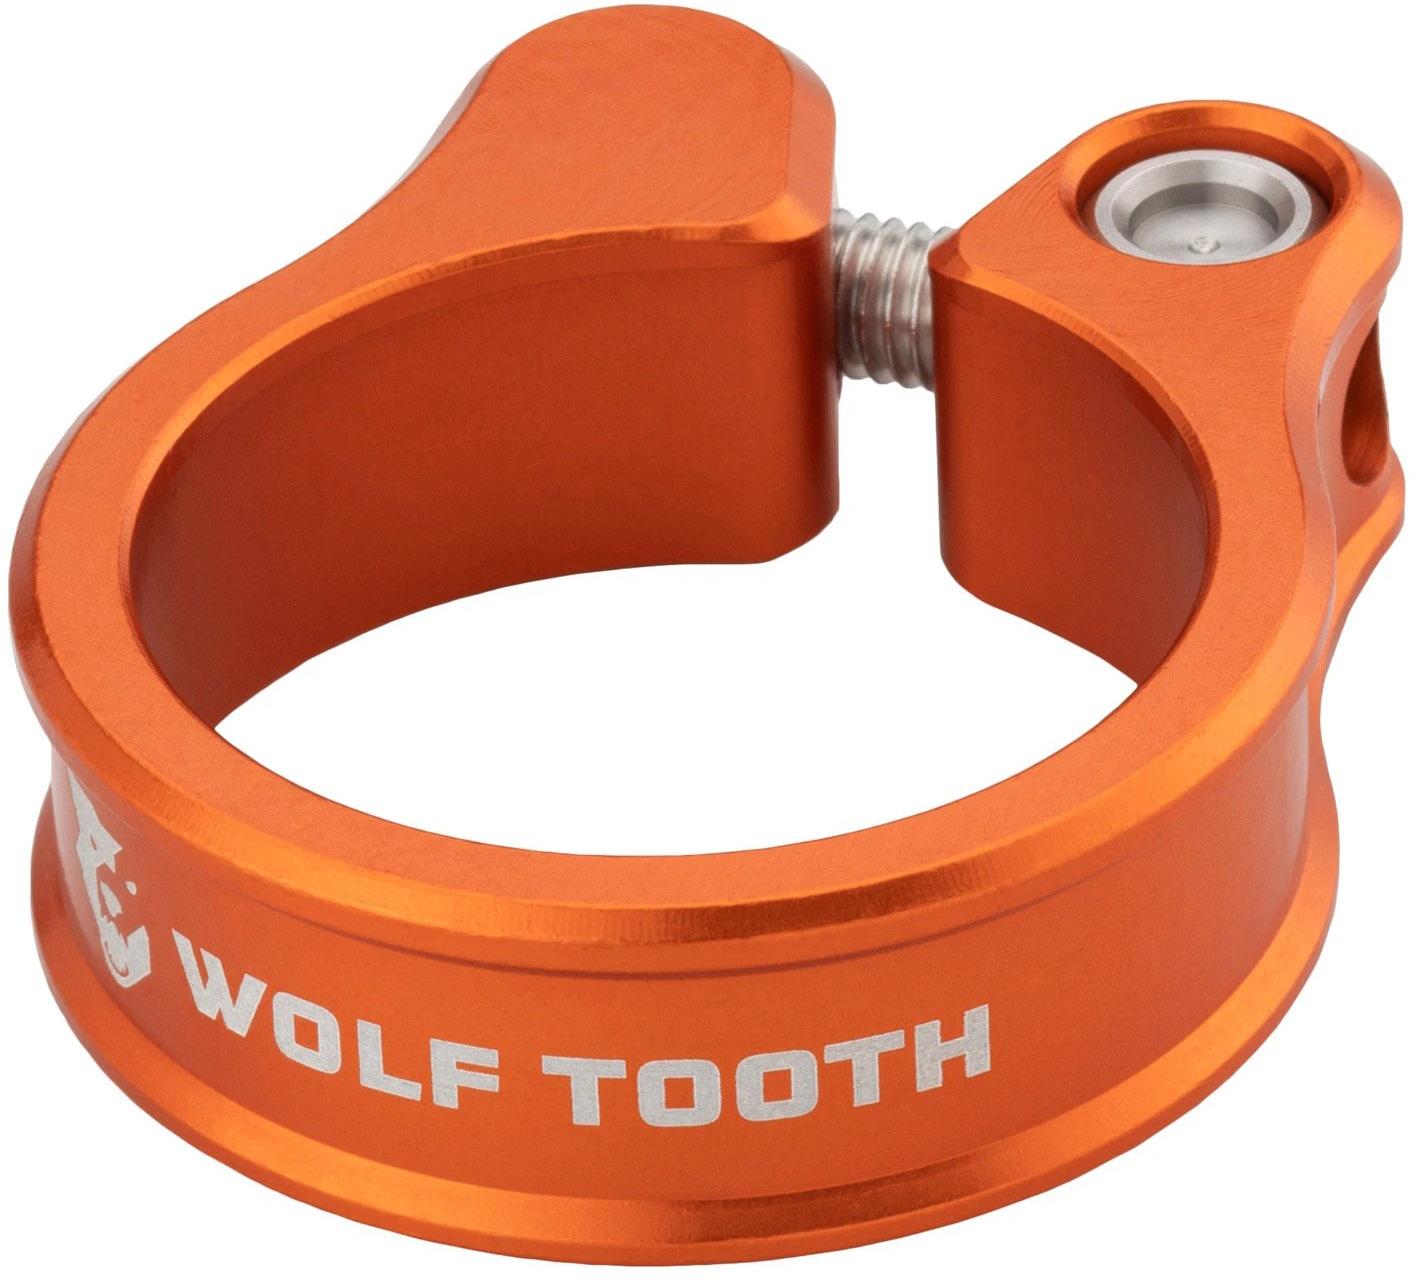 Wolf Tooth Seatpost Clamp - Bolt-on - Orange